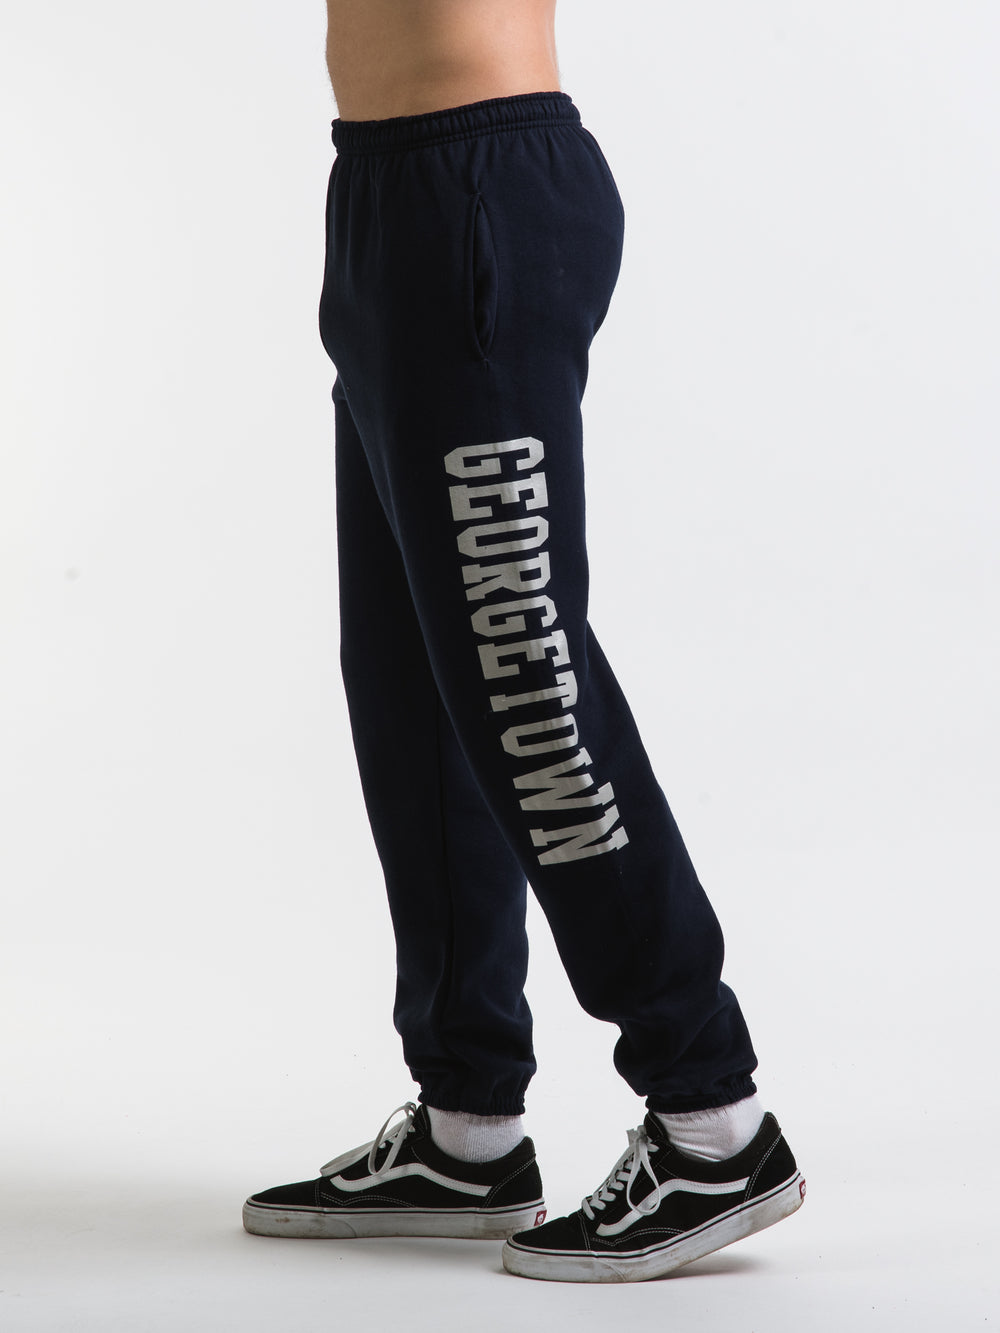 RUSSELL GEORGETOWN SWEAT PANT  - CLEARANCE